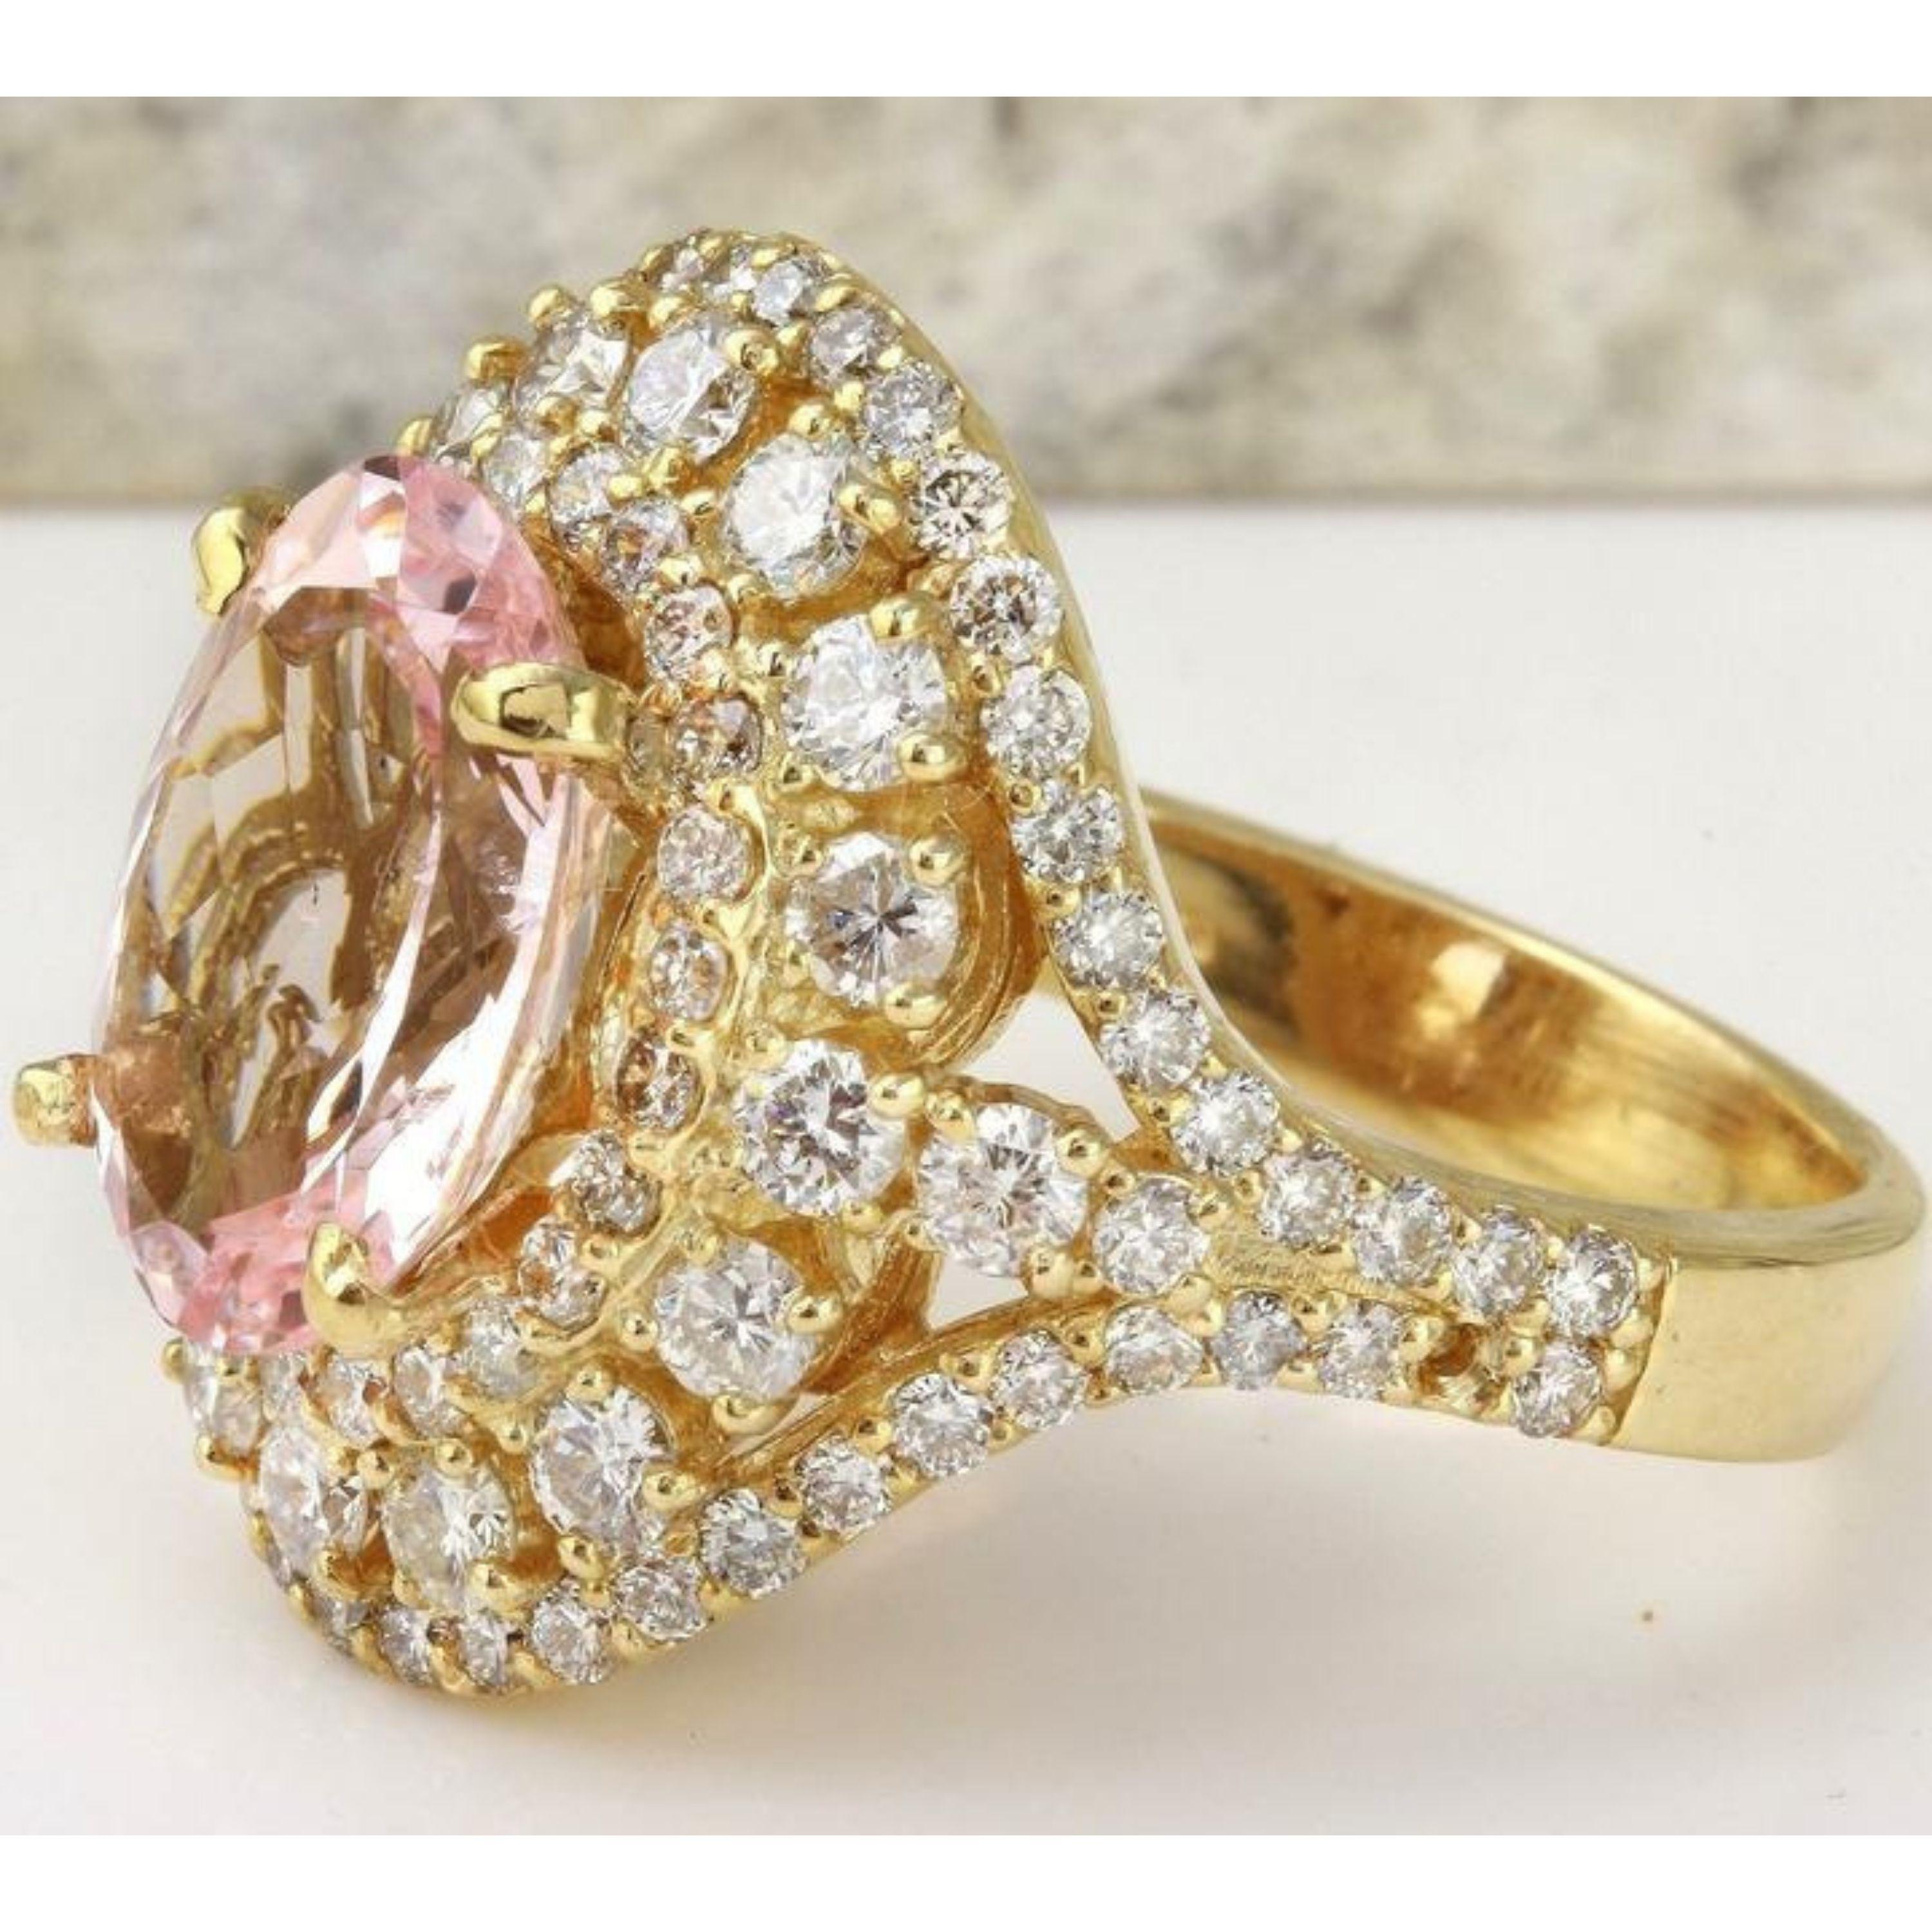 5.00 Carats Exquisite Natural Morganite and Diamond 14K Solid Yellow Gold Ring

Total Natural Morganite Weight is: Approx. 3.00 Carats

Morganite Measures: Approx. 11.72x 8.67mm

Natural Round Diamonds Weight: Approx. 2.00 Carats (color G-H /